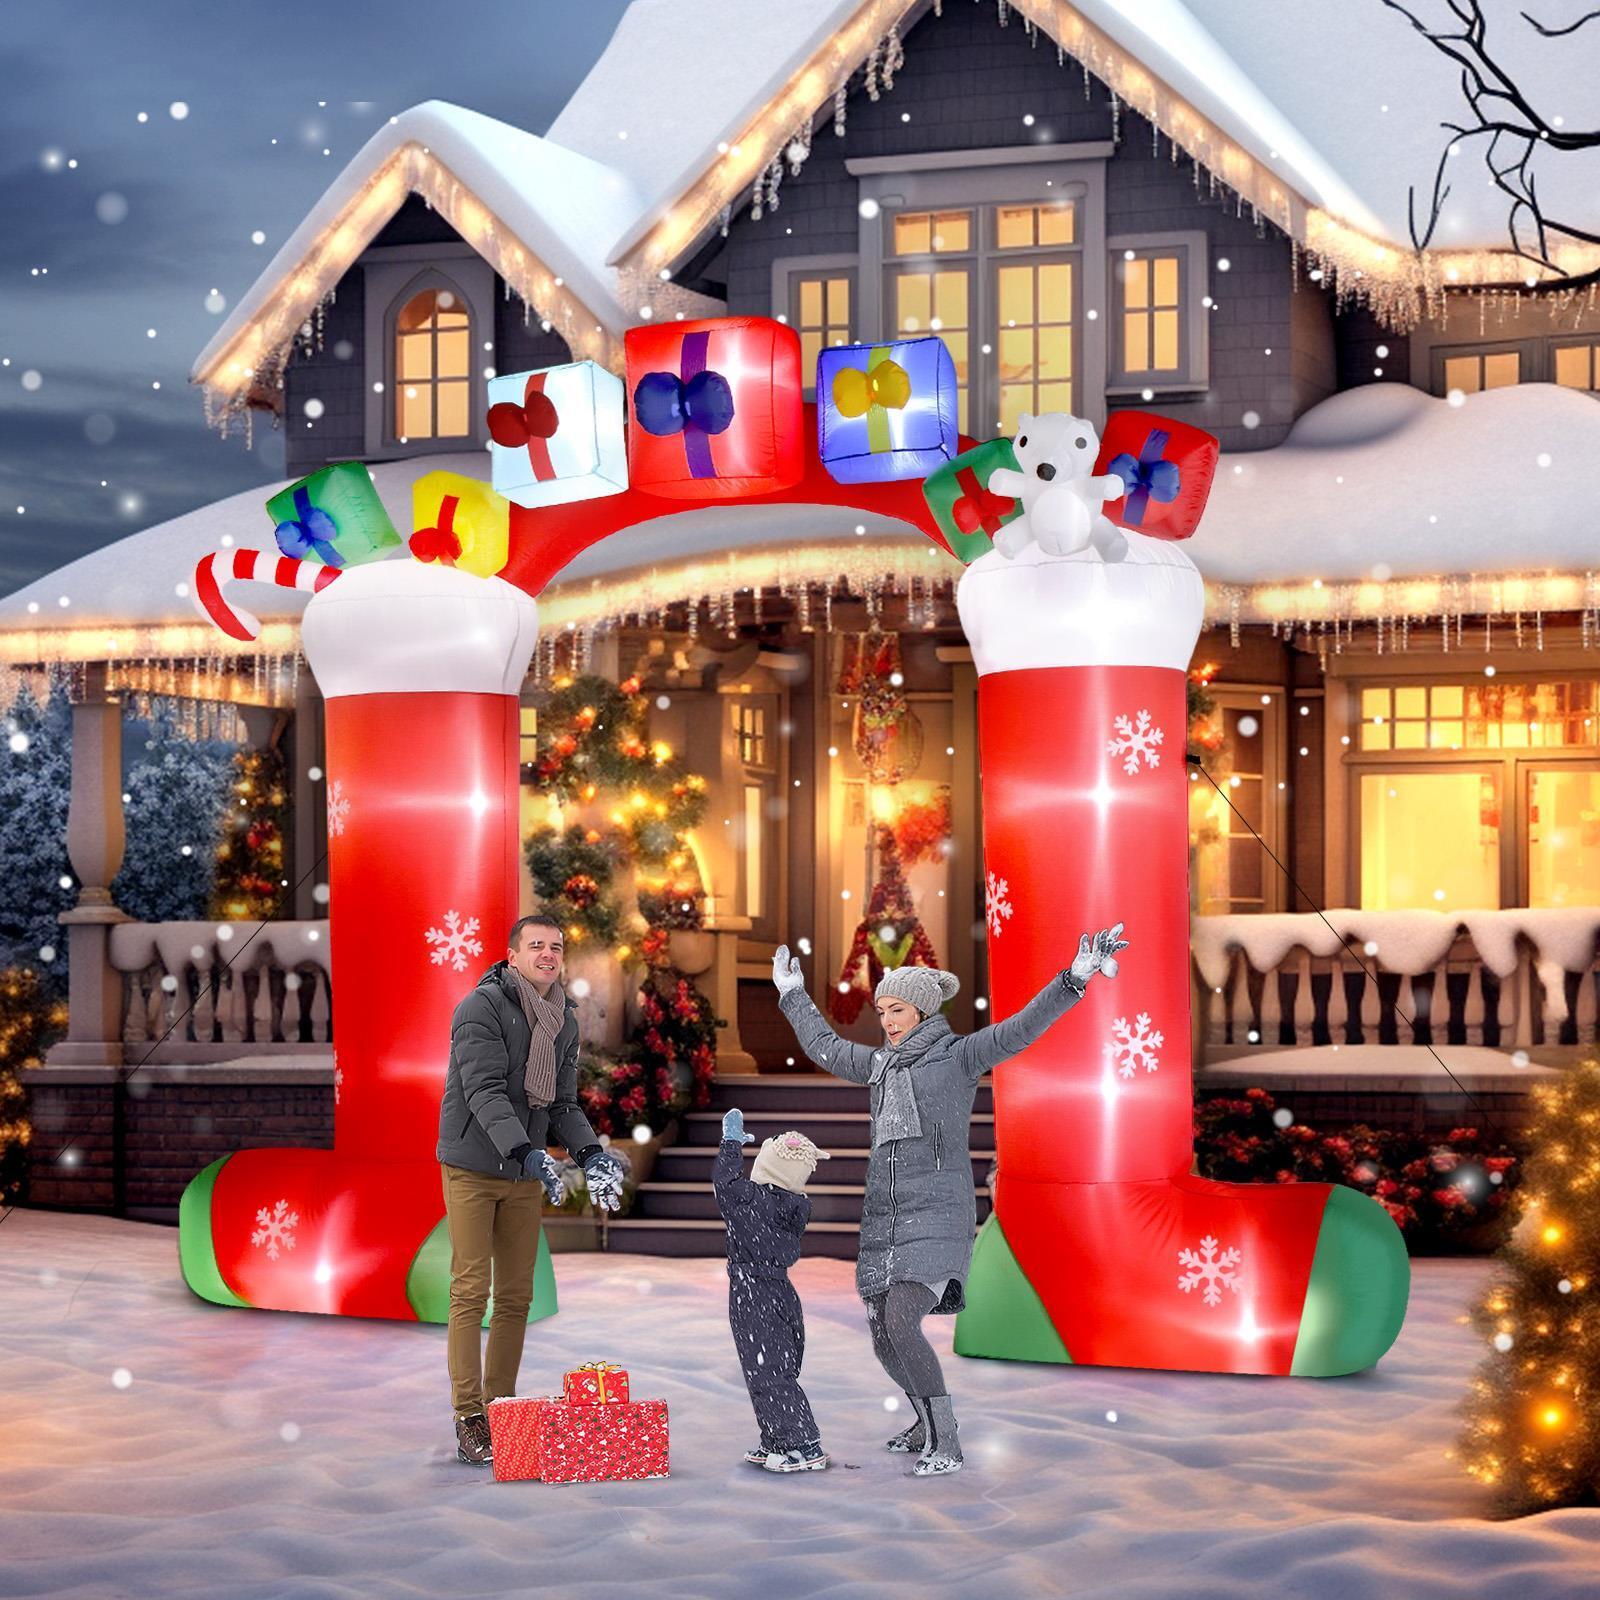 9 FT Christmas Inflatables Arch with Santa & Snowman Blow up Outdoor Decorations